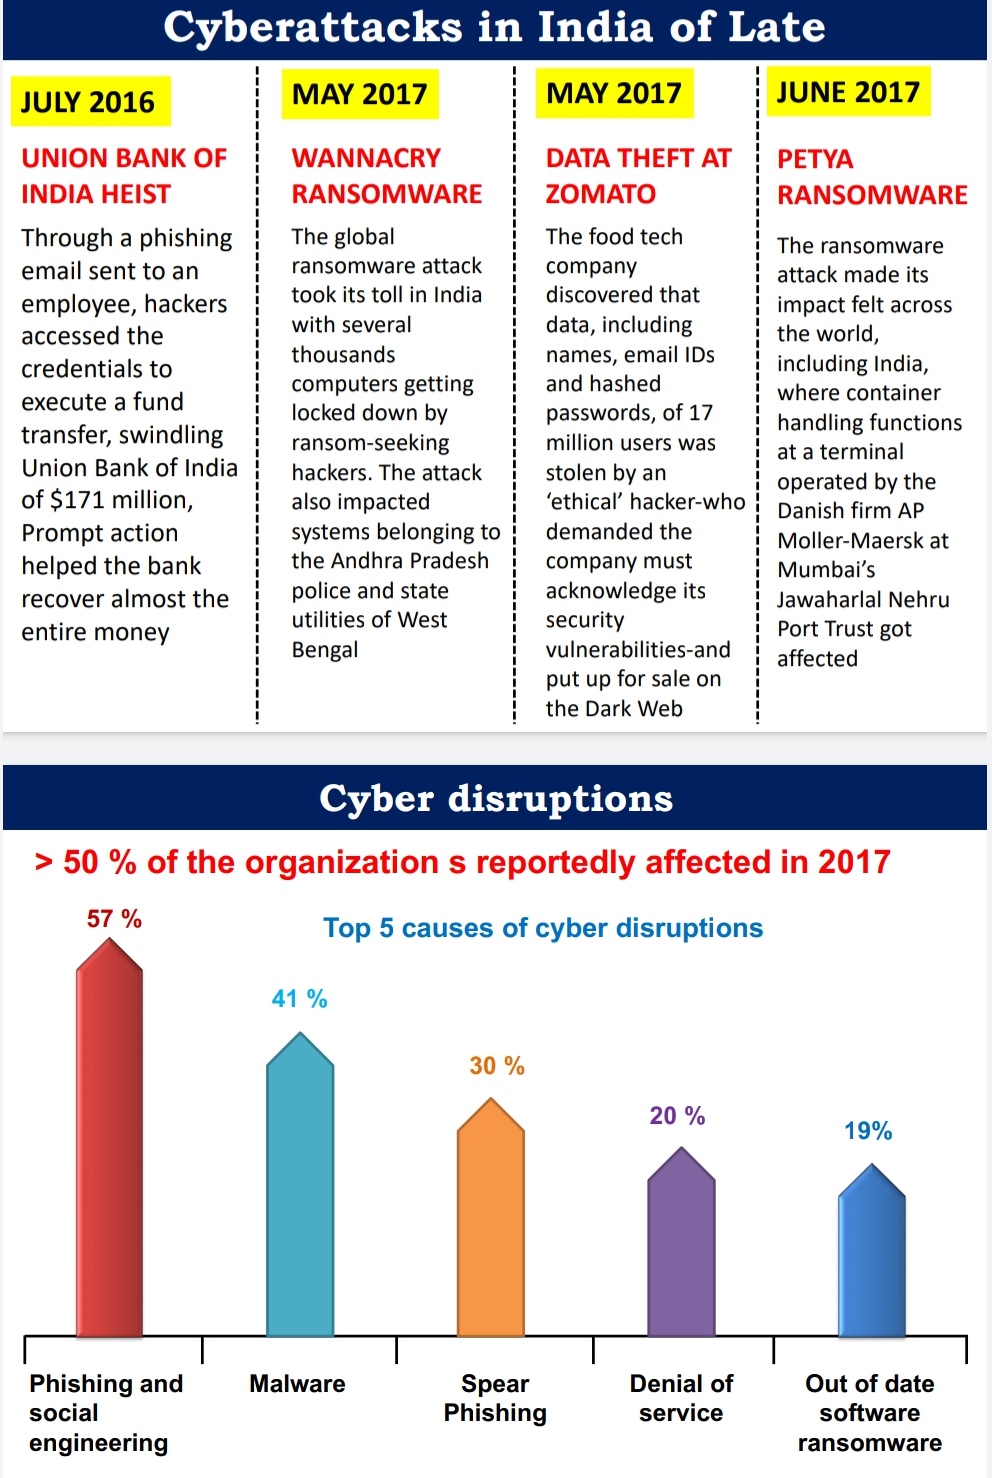 CYBERSECURITY IN INDIA